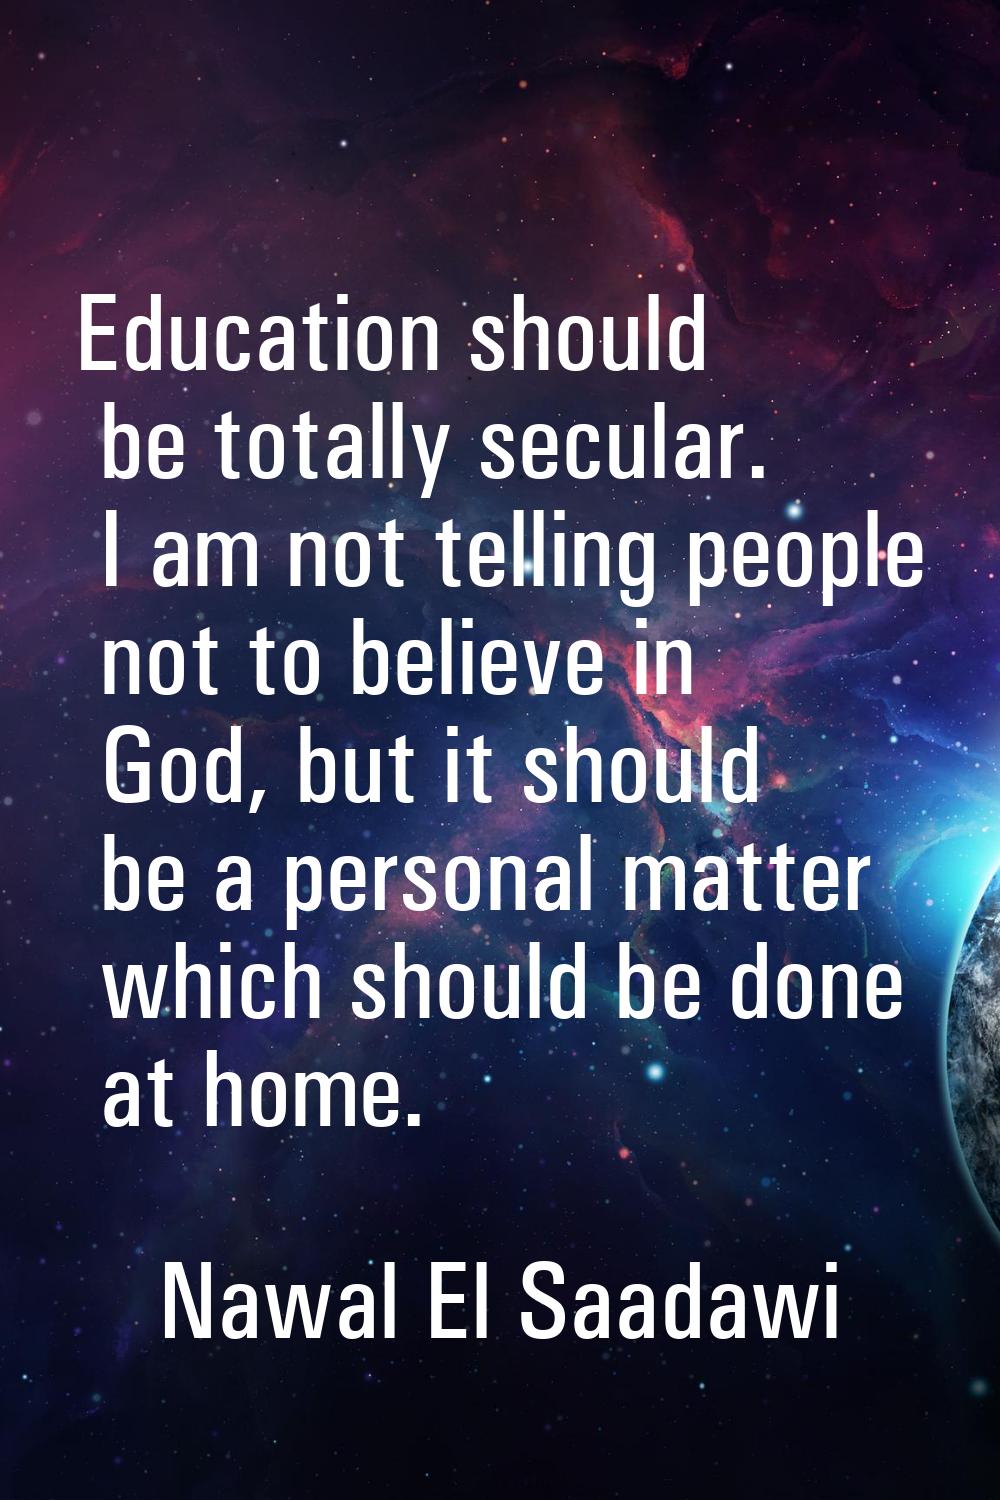 Education should be totally secular. I am not telling people not to believe in God, but it should b